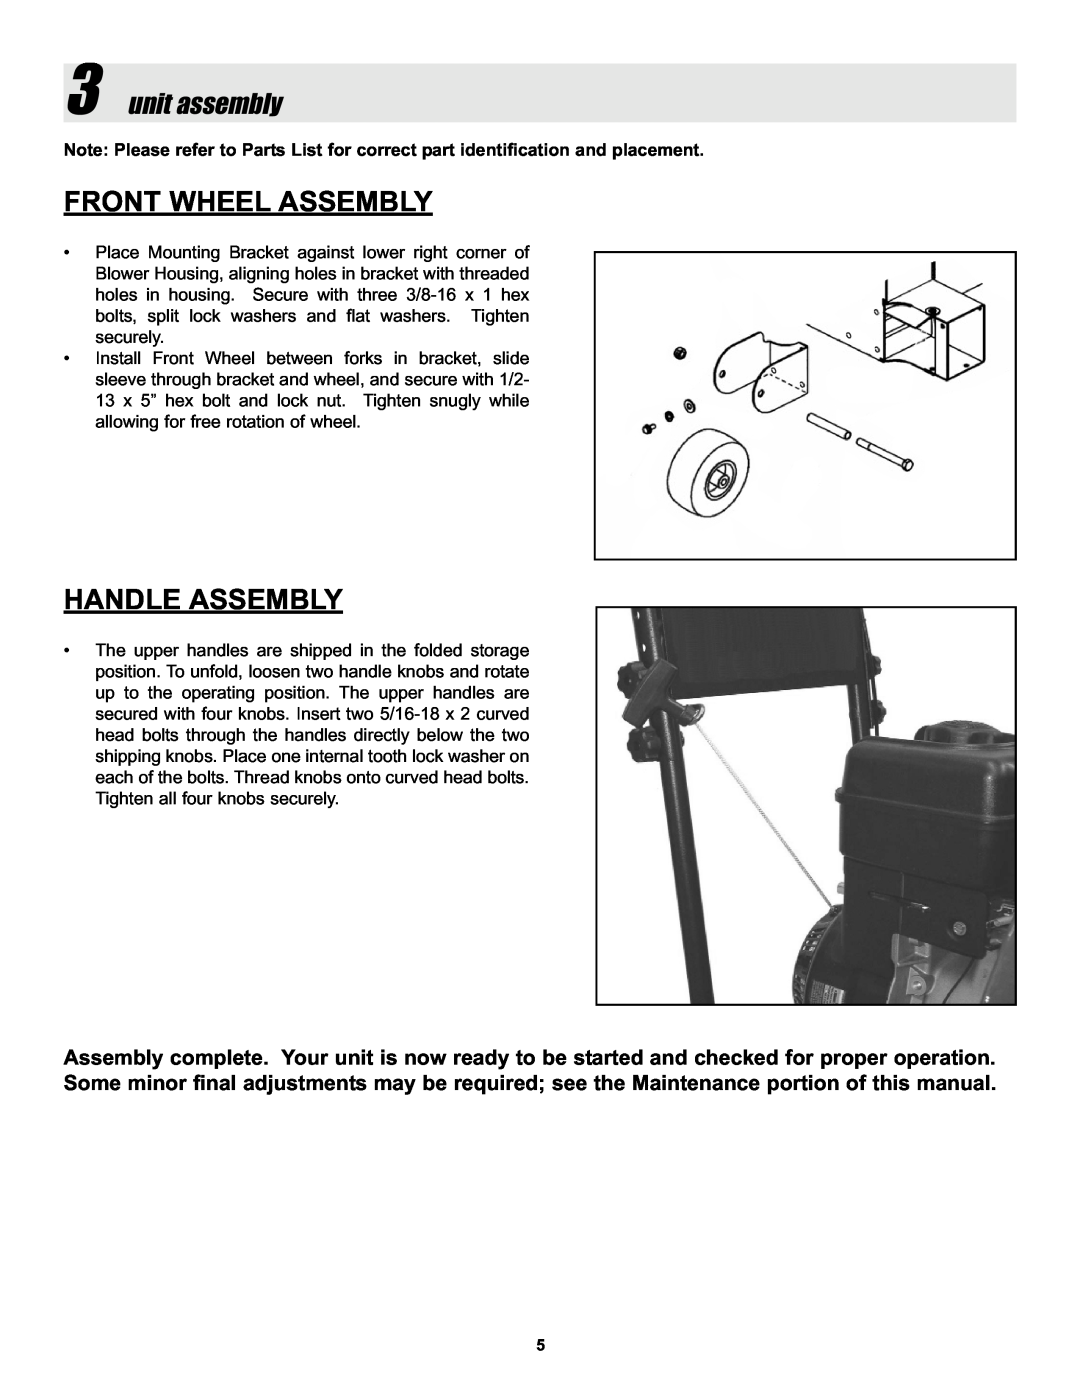 Snapper ELBX10152BV manual Front Wheel Assembly, Handle Assembly, unit assembly 